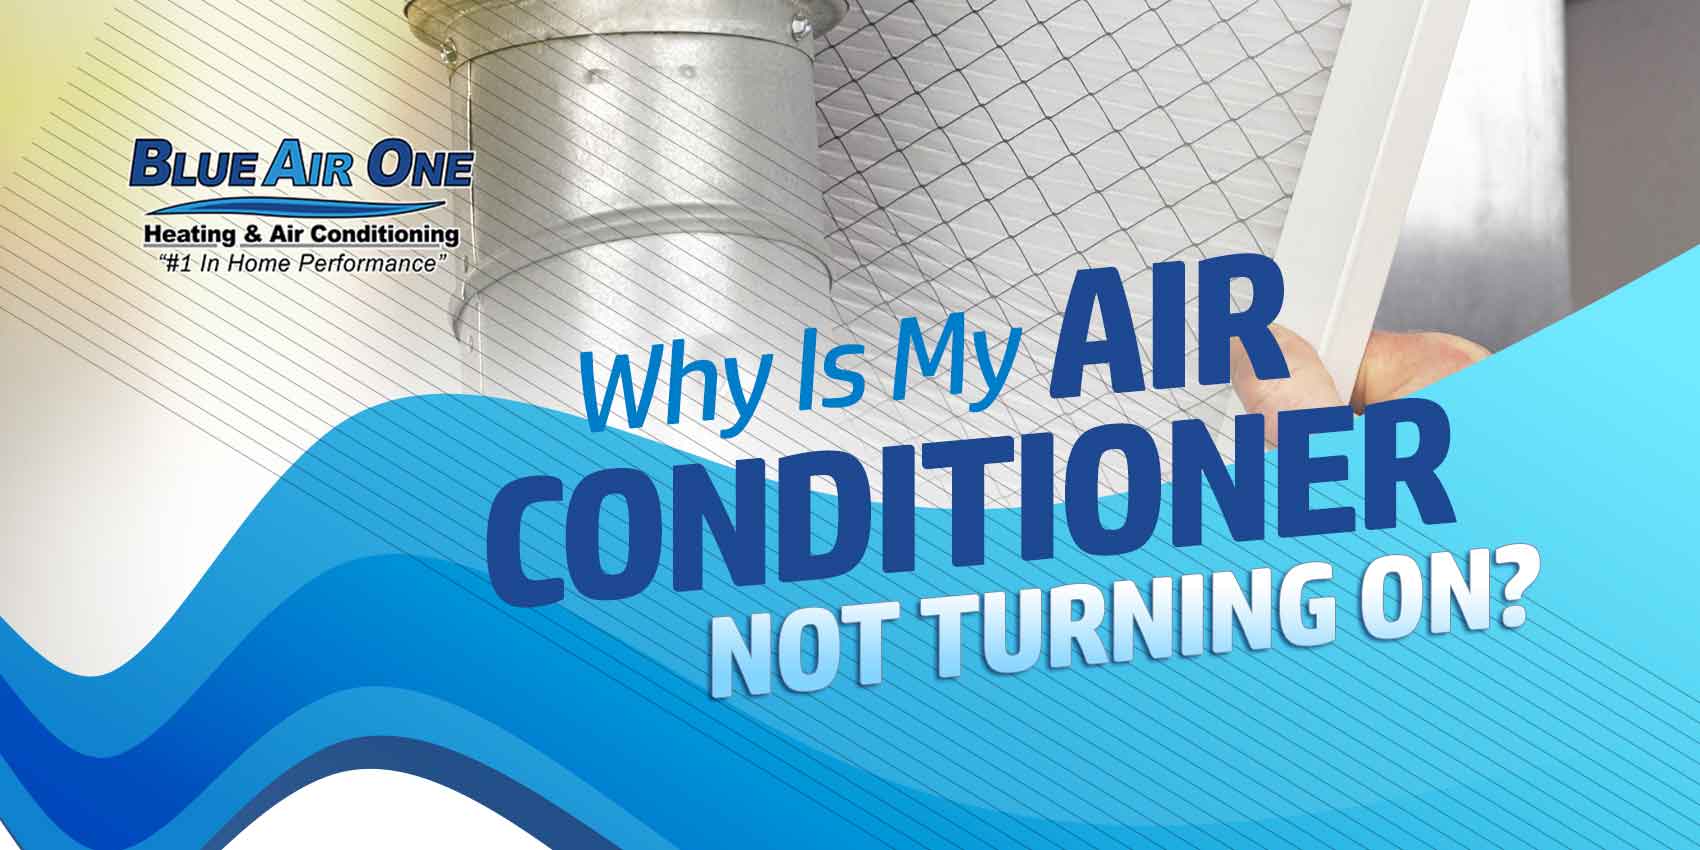 Why Is My Air Conditioner Not Turning On?